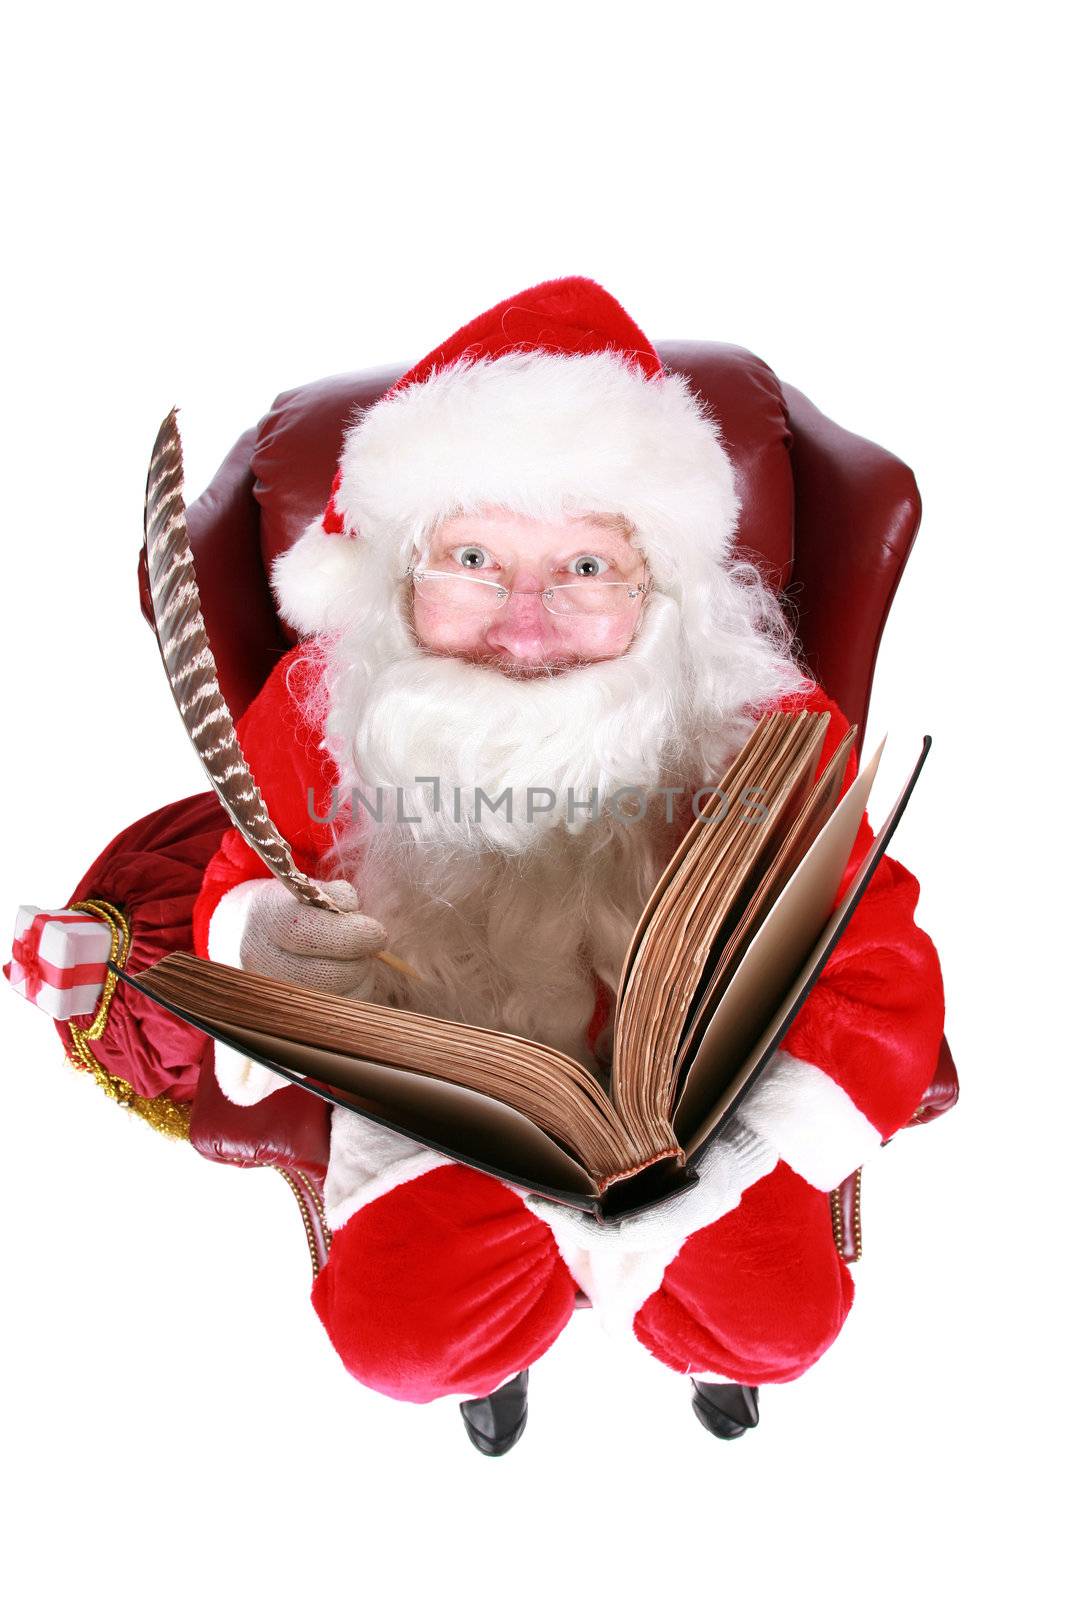 Santa writing in the book of names of good children by jeffbanke